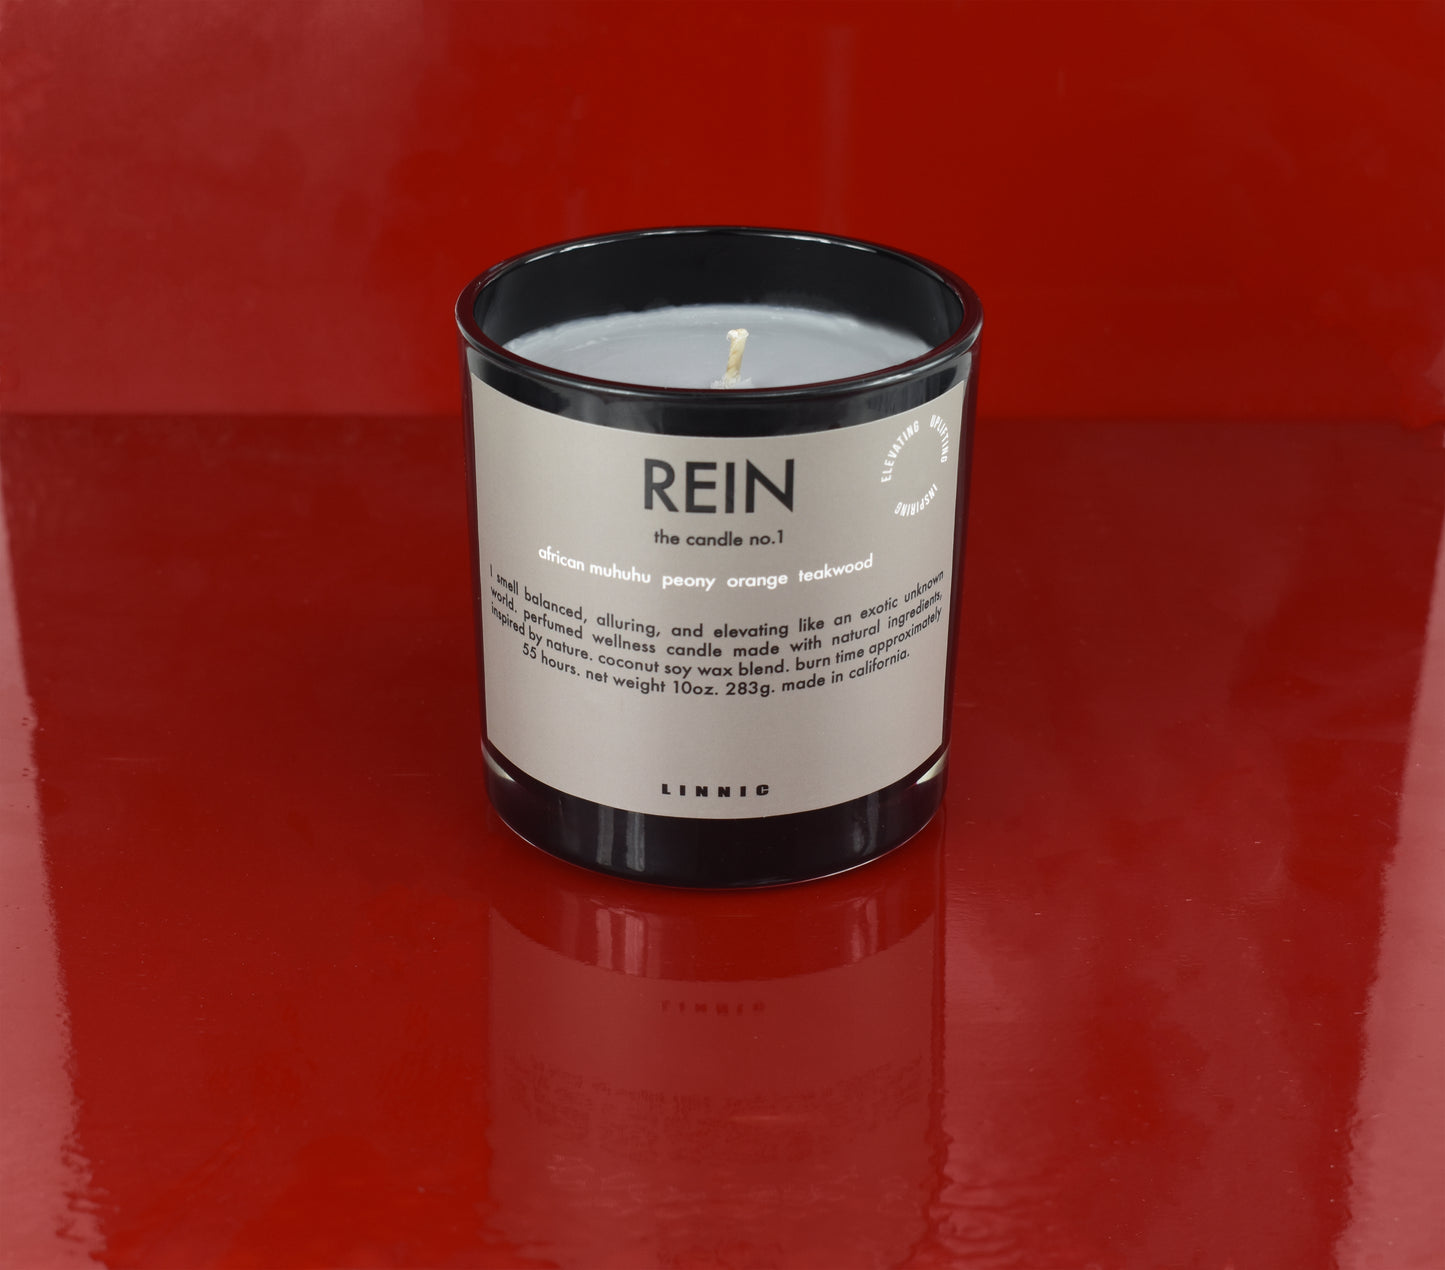 Rein no.1 Atmosphere & Massage Candle